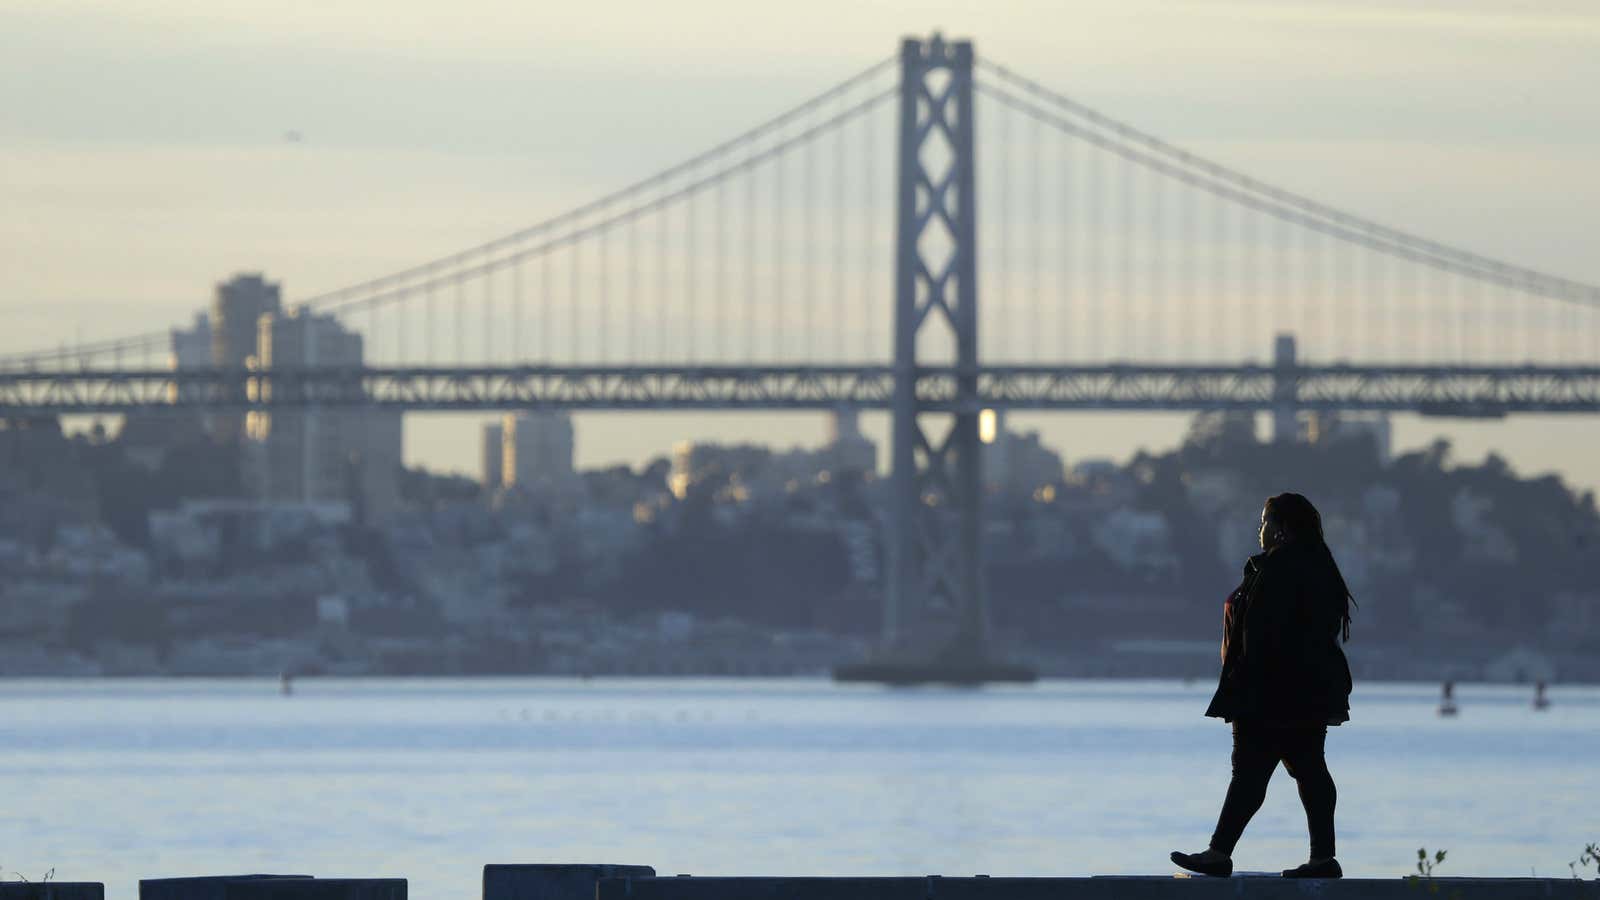 A land tax in the Bay area could help improve social services and infrastructure.